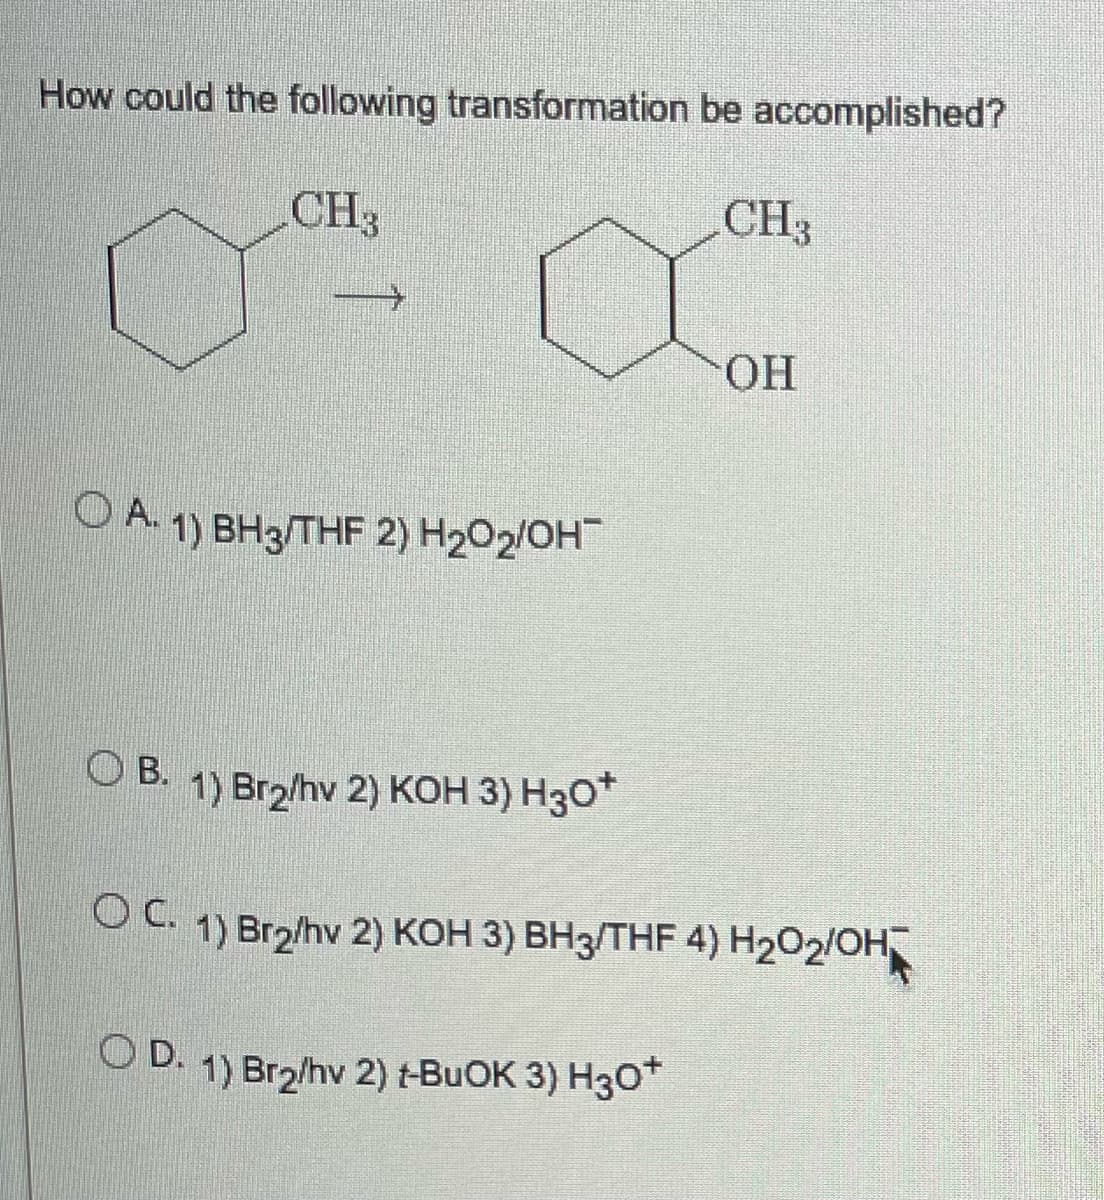 How could the following transformation be accomplished?
CH3
CH3
OH
A. 1) BH3/THF 2) H₂O₂/OH
OB. 1) Br2/hv 2) KOH 3) H30*
OC. 1) Br₂/hv 2) KOH 3) BH3/THF 4) H2O₂/OH
OD. 1) Br₂/hv 2) t-BuOK 3) H3O+